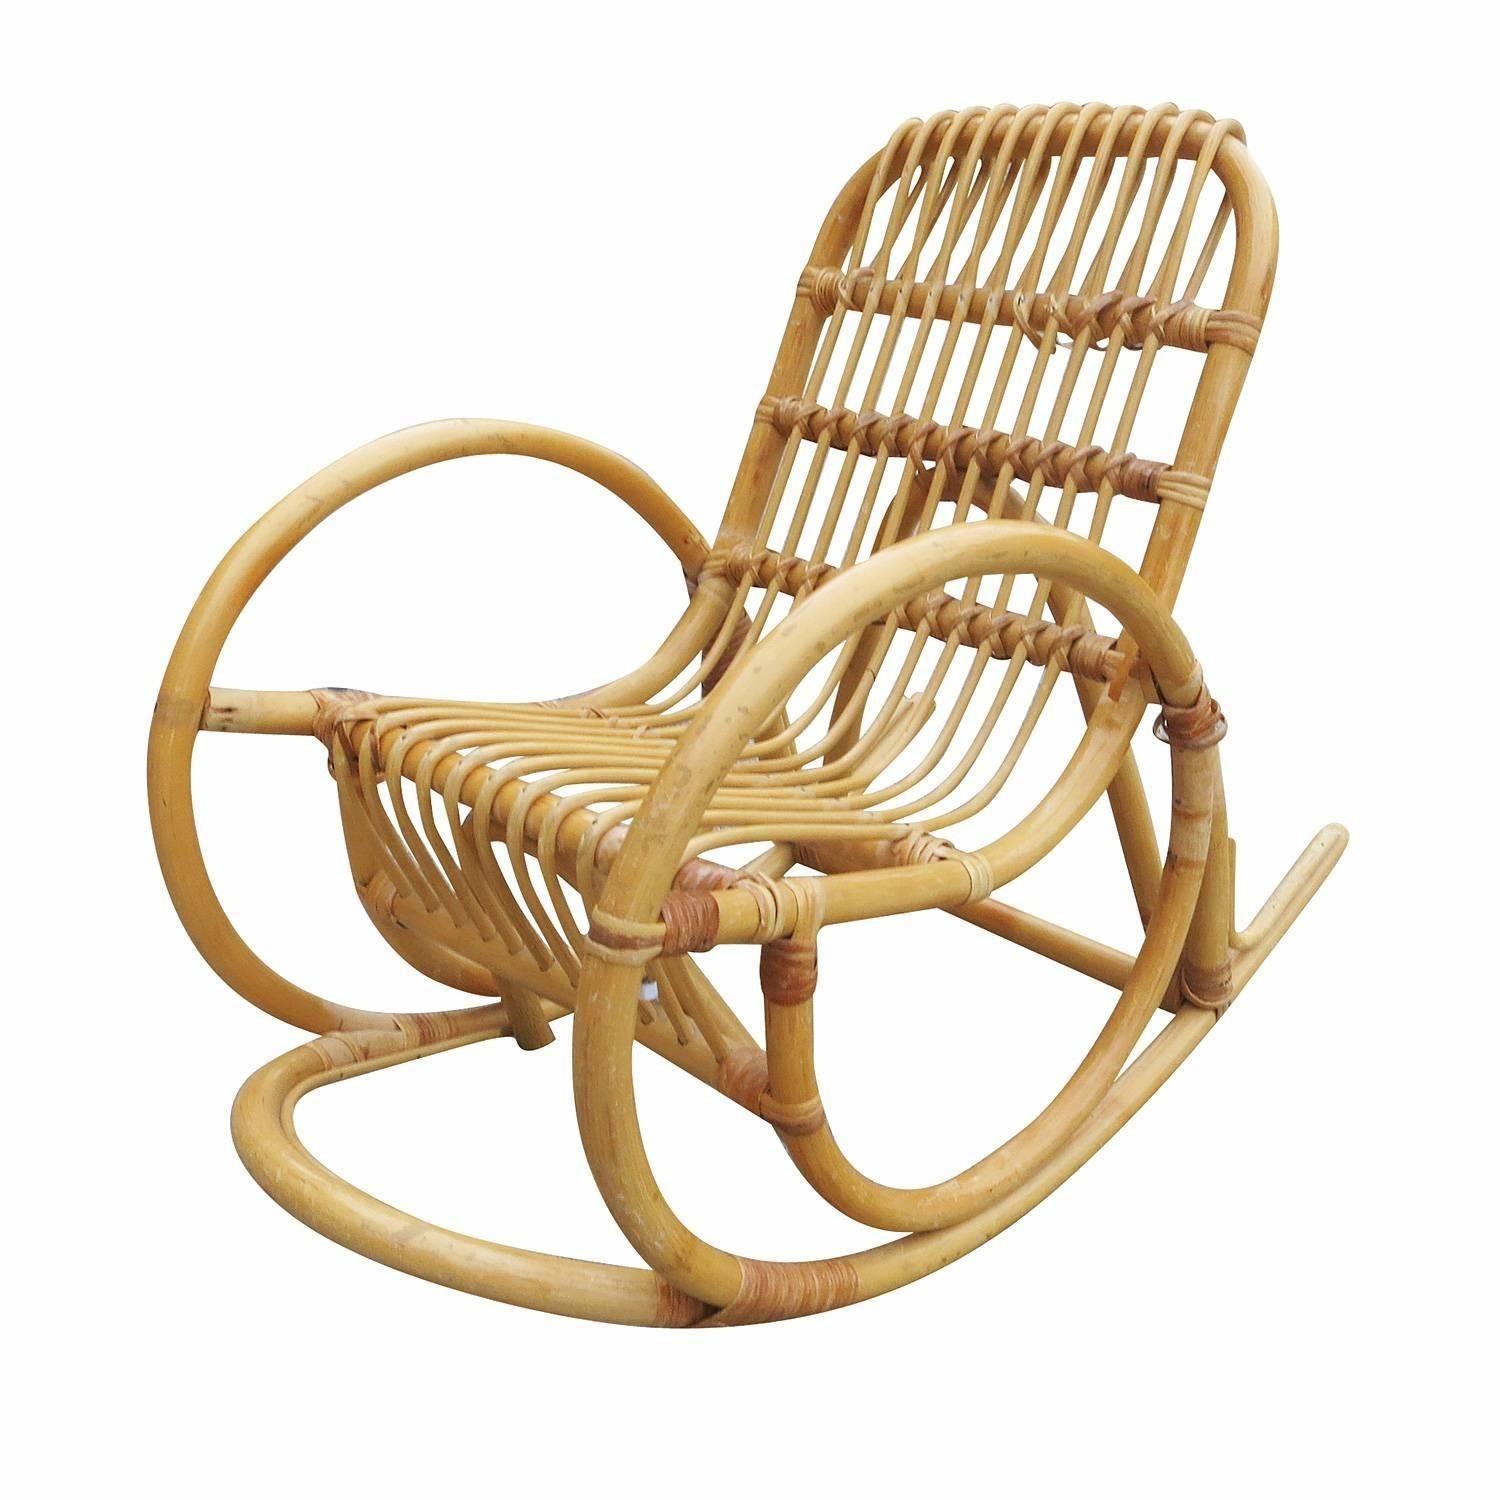 A rare Paul Frankl inspired one-strand snake arm child's size rattan rocking chair with stick rattan seat.


Restored to new for you.

All rattan, bamboo and wicker furniture has been painstakingly refurbished to the highest standards with the best